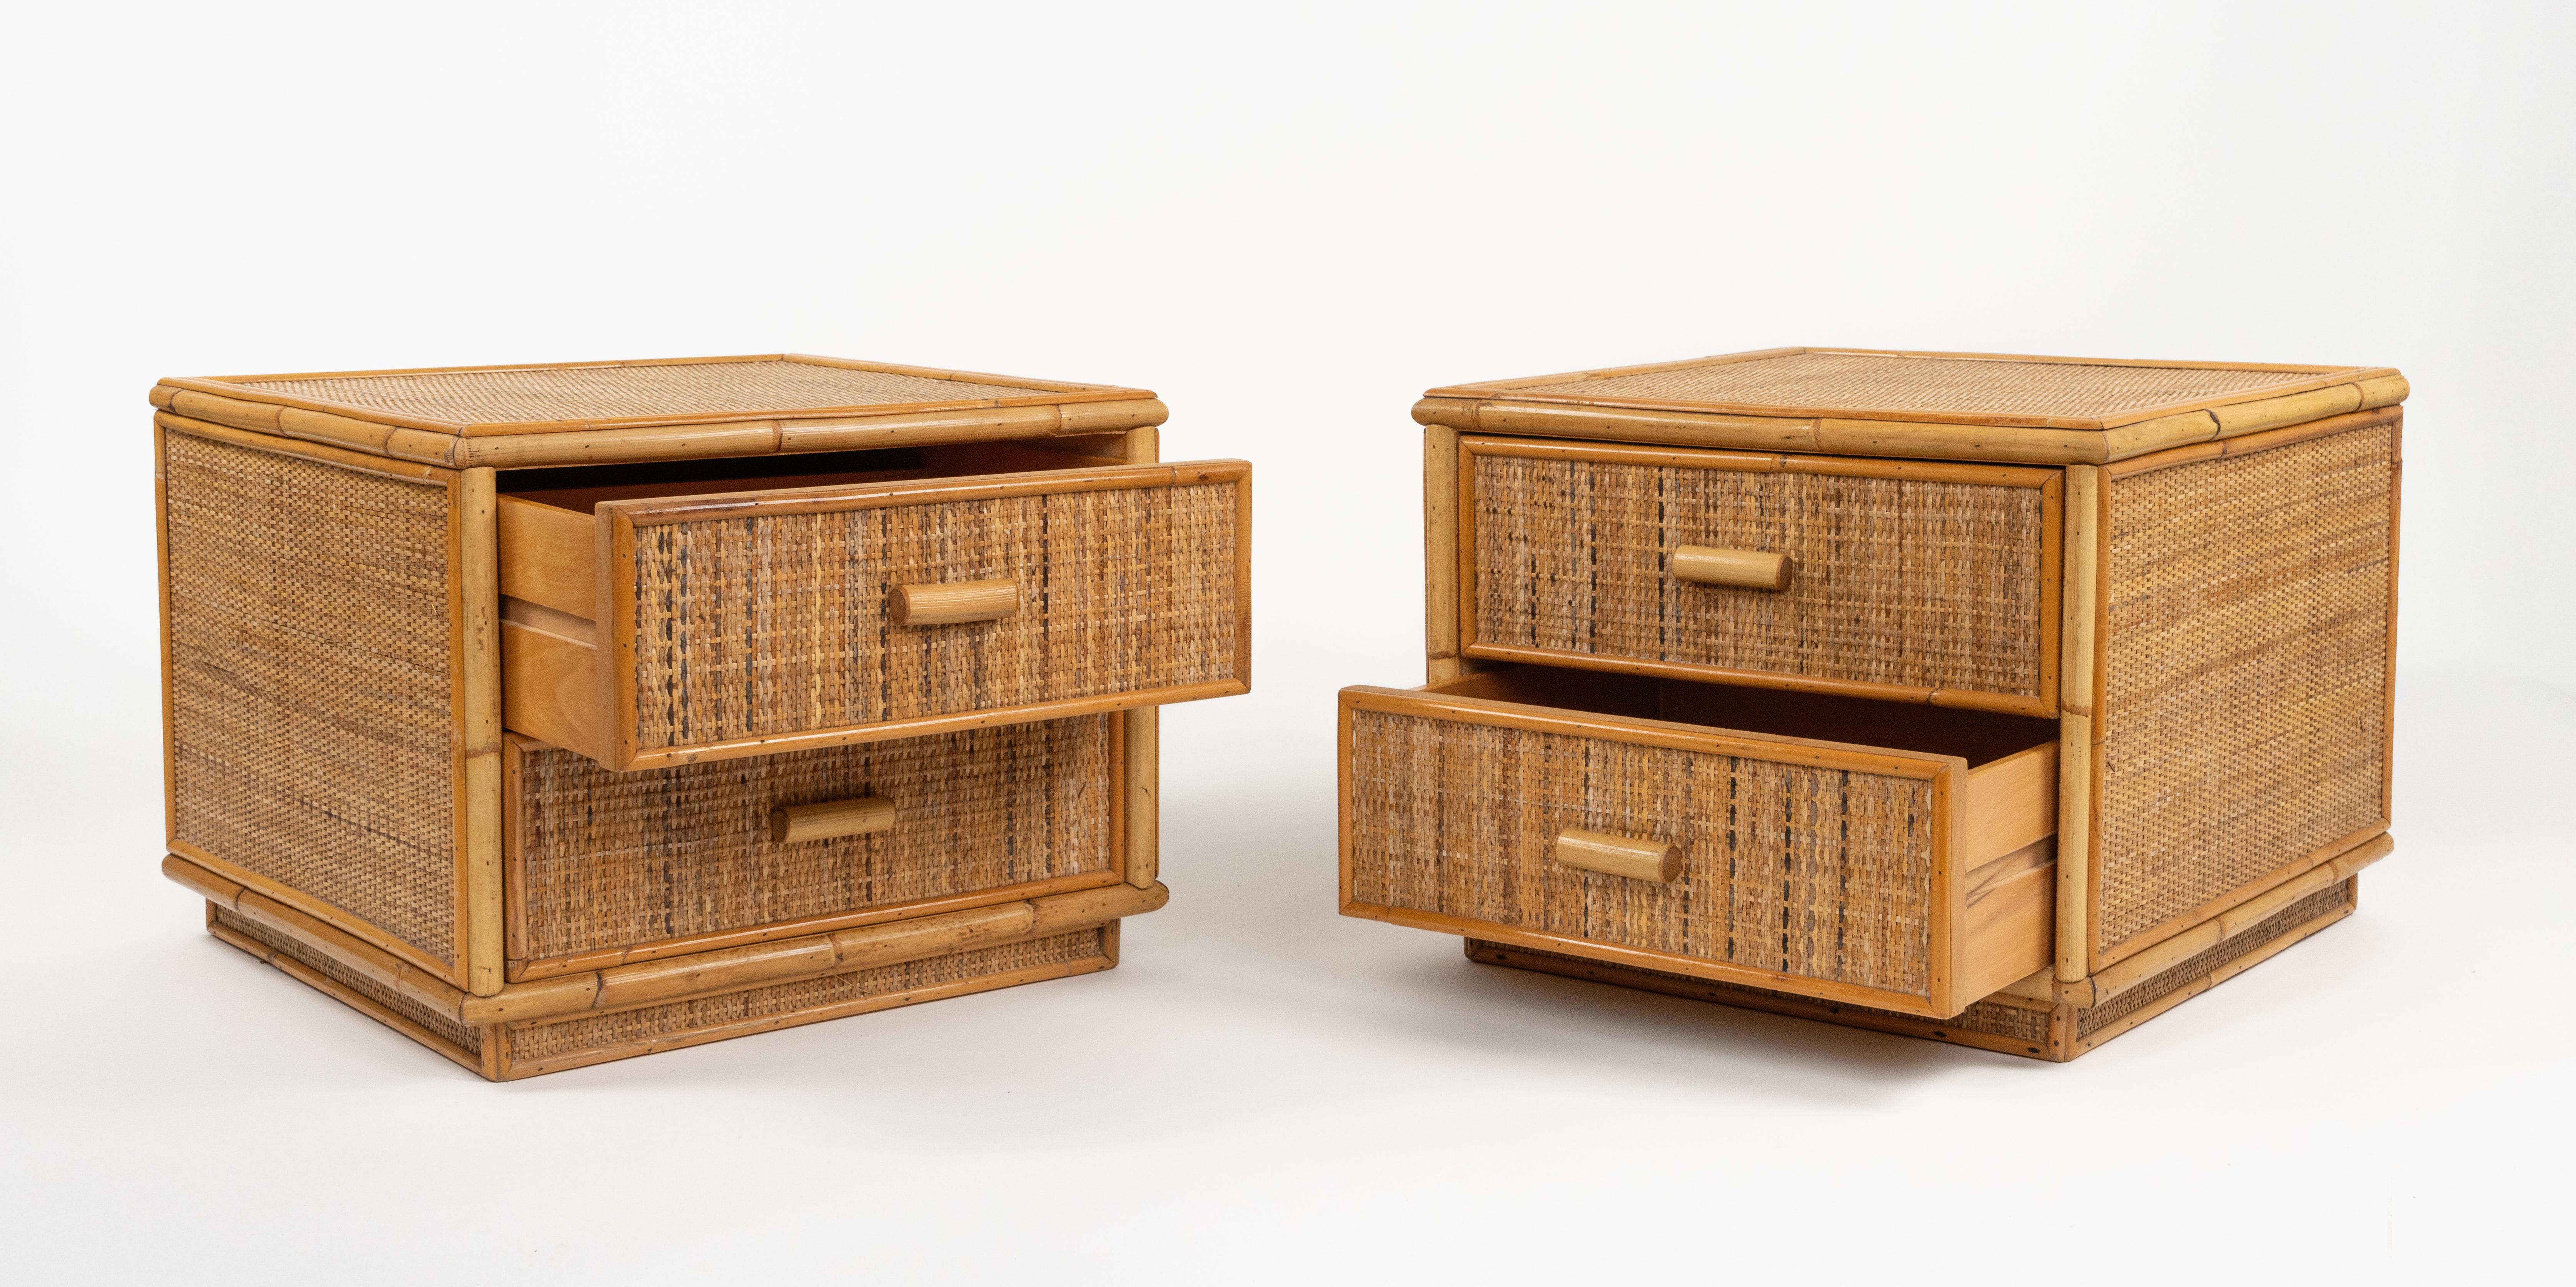 Bamboo and Rattan Pair of Bedside Tables Nightstands Dal Vera Style, Italy 1970s For Sale 2